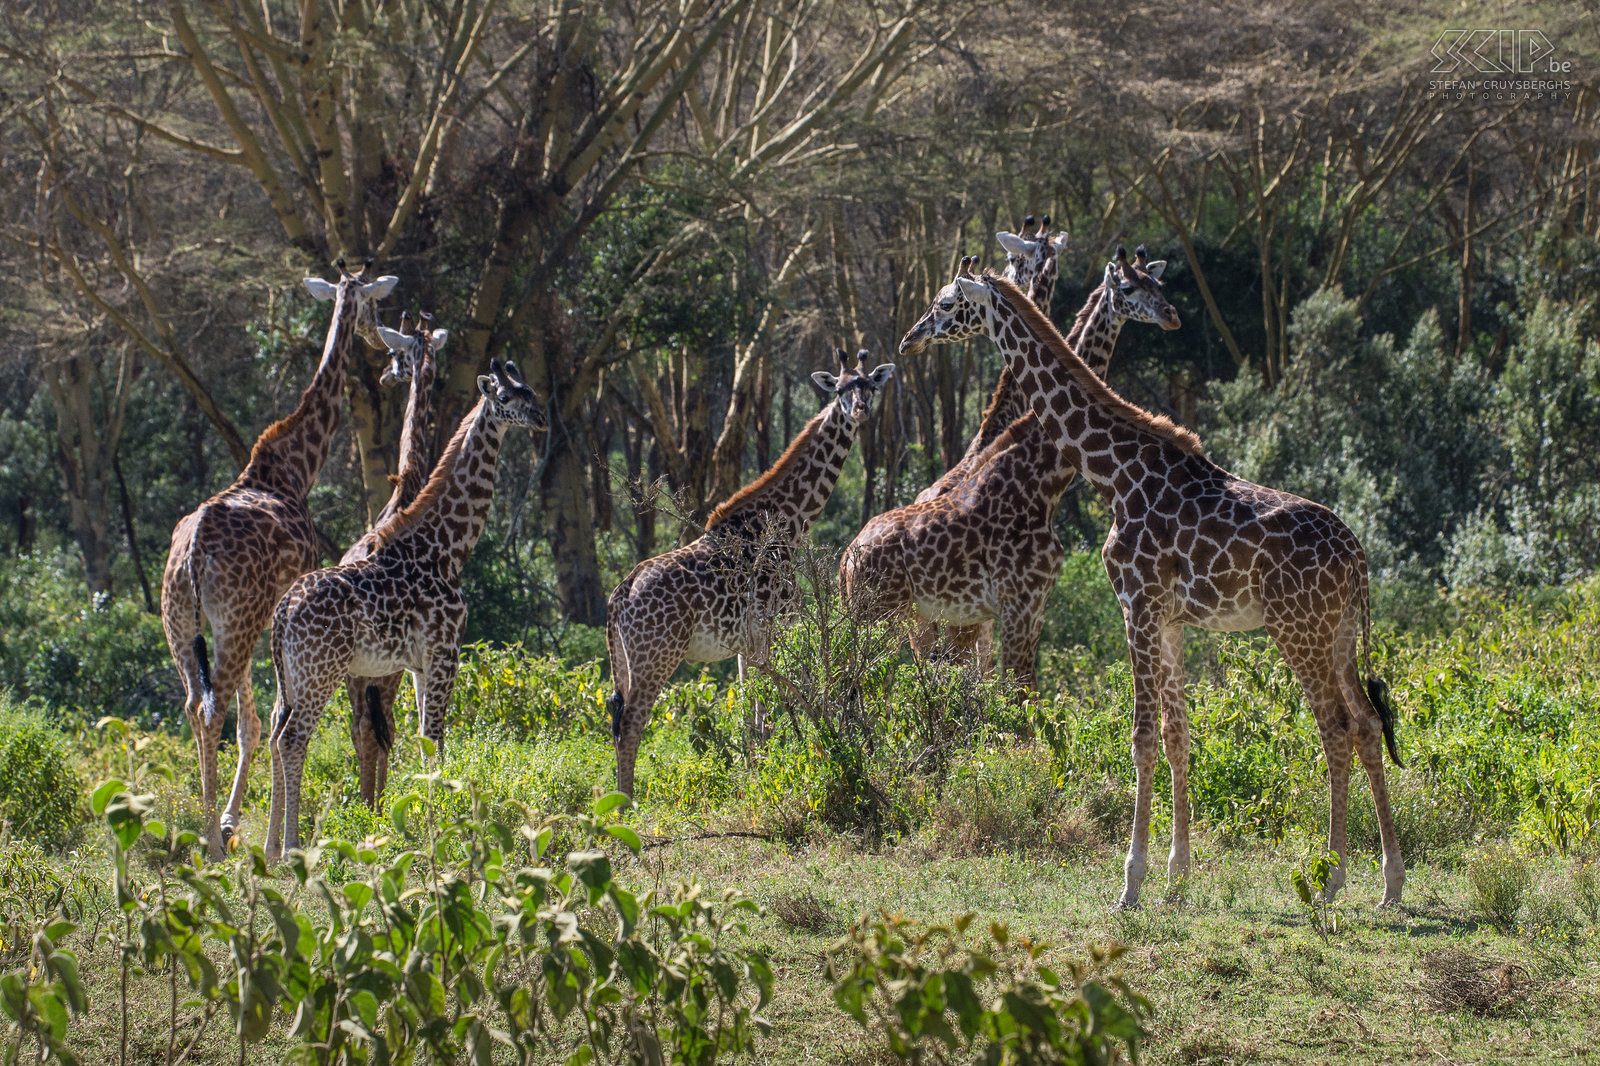 Naivasha - Crater Lake - Giraffes At a certain moment we were in the middle of a group of 25 giraffes which was an exciting moment. Stefan Cruysberghs